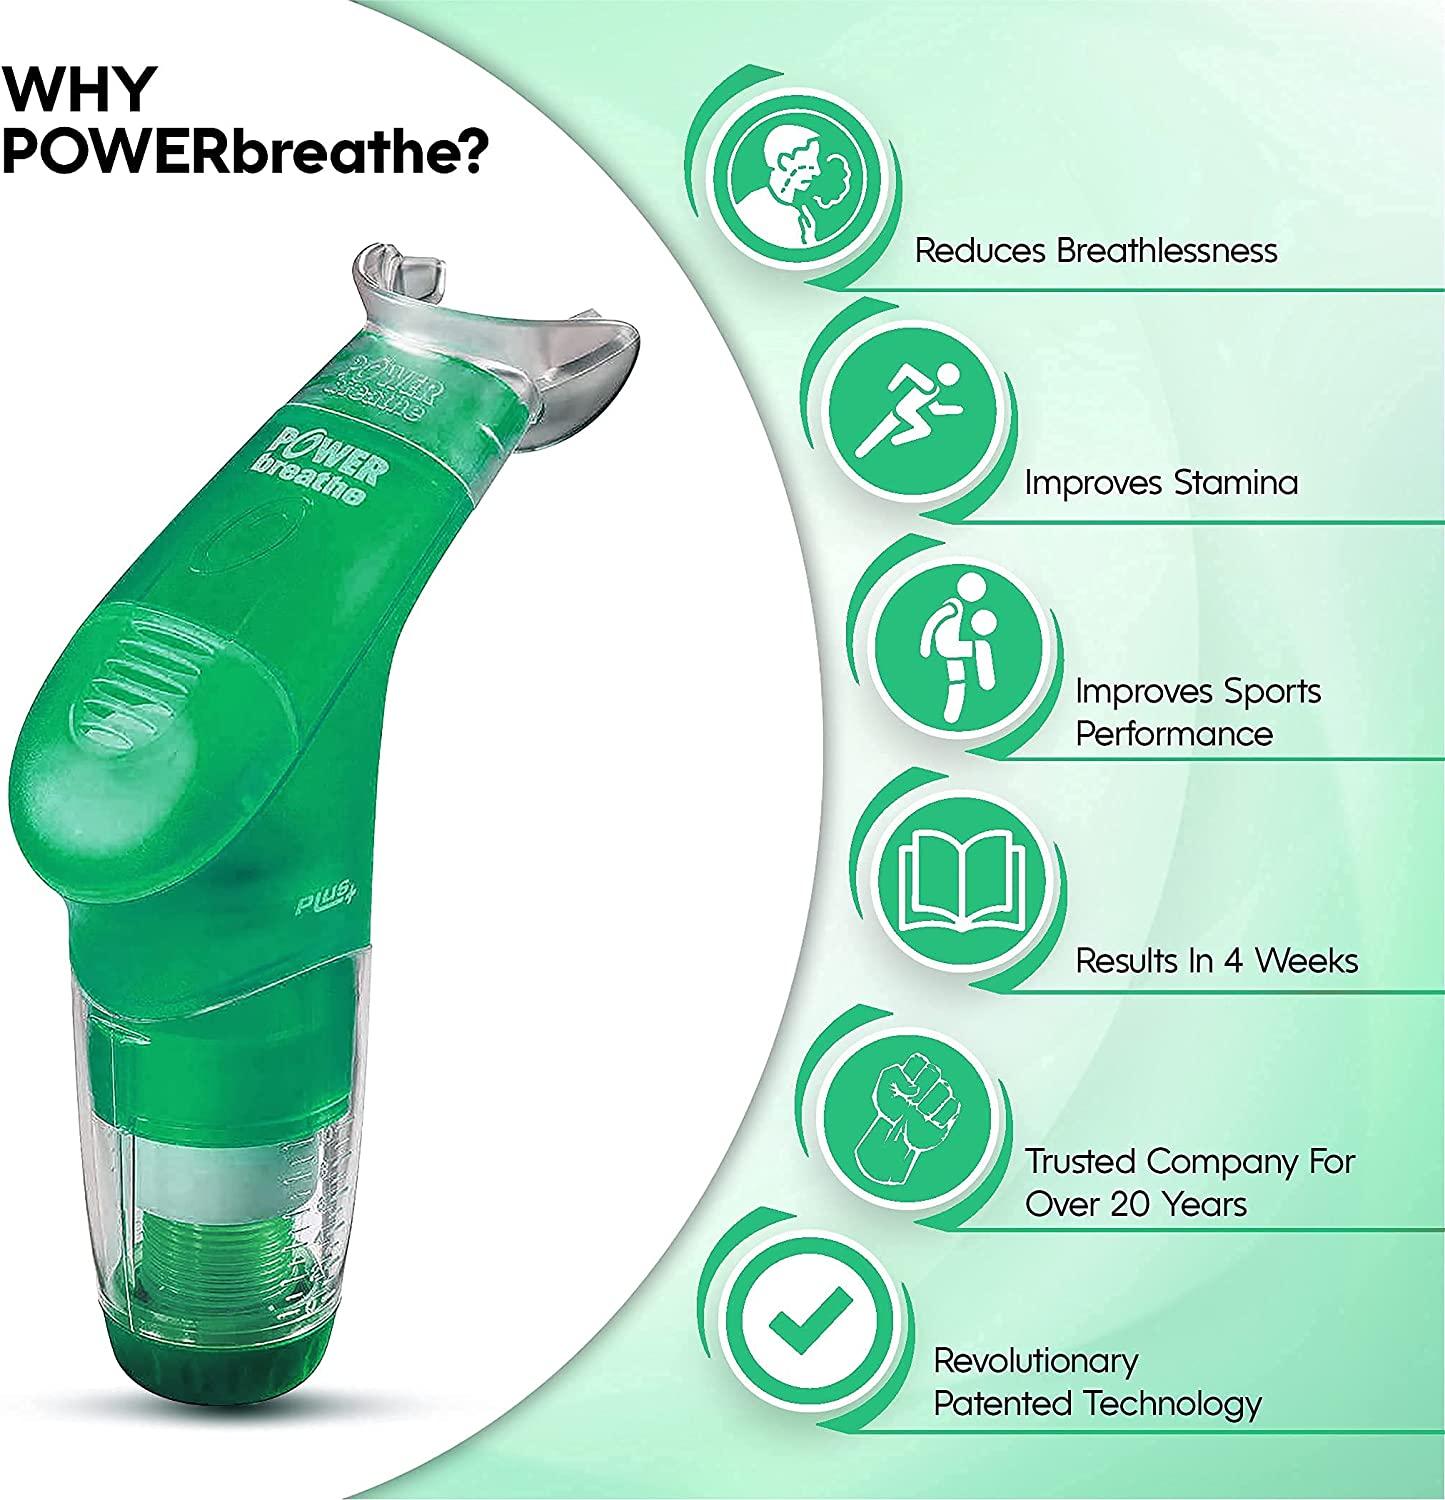 POWERbreathe - Breathing Exercise Device, Breathing Trainer and Therapy  Tool to Strengthen Breathing Muscles and Help Lung Capacity, Handheld  Inspiratory Muscle Trainer - Green, Light Resistance